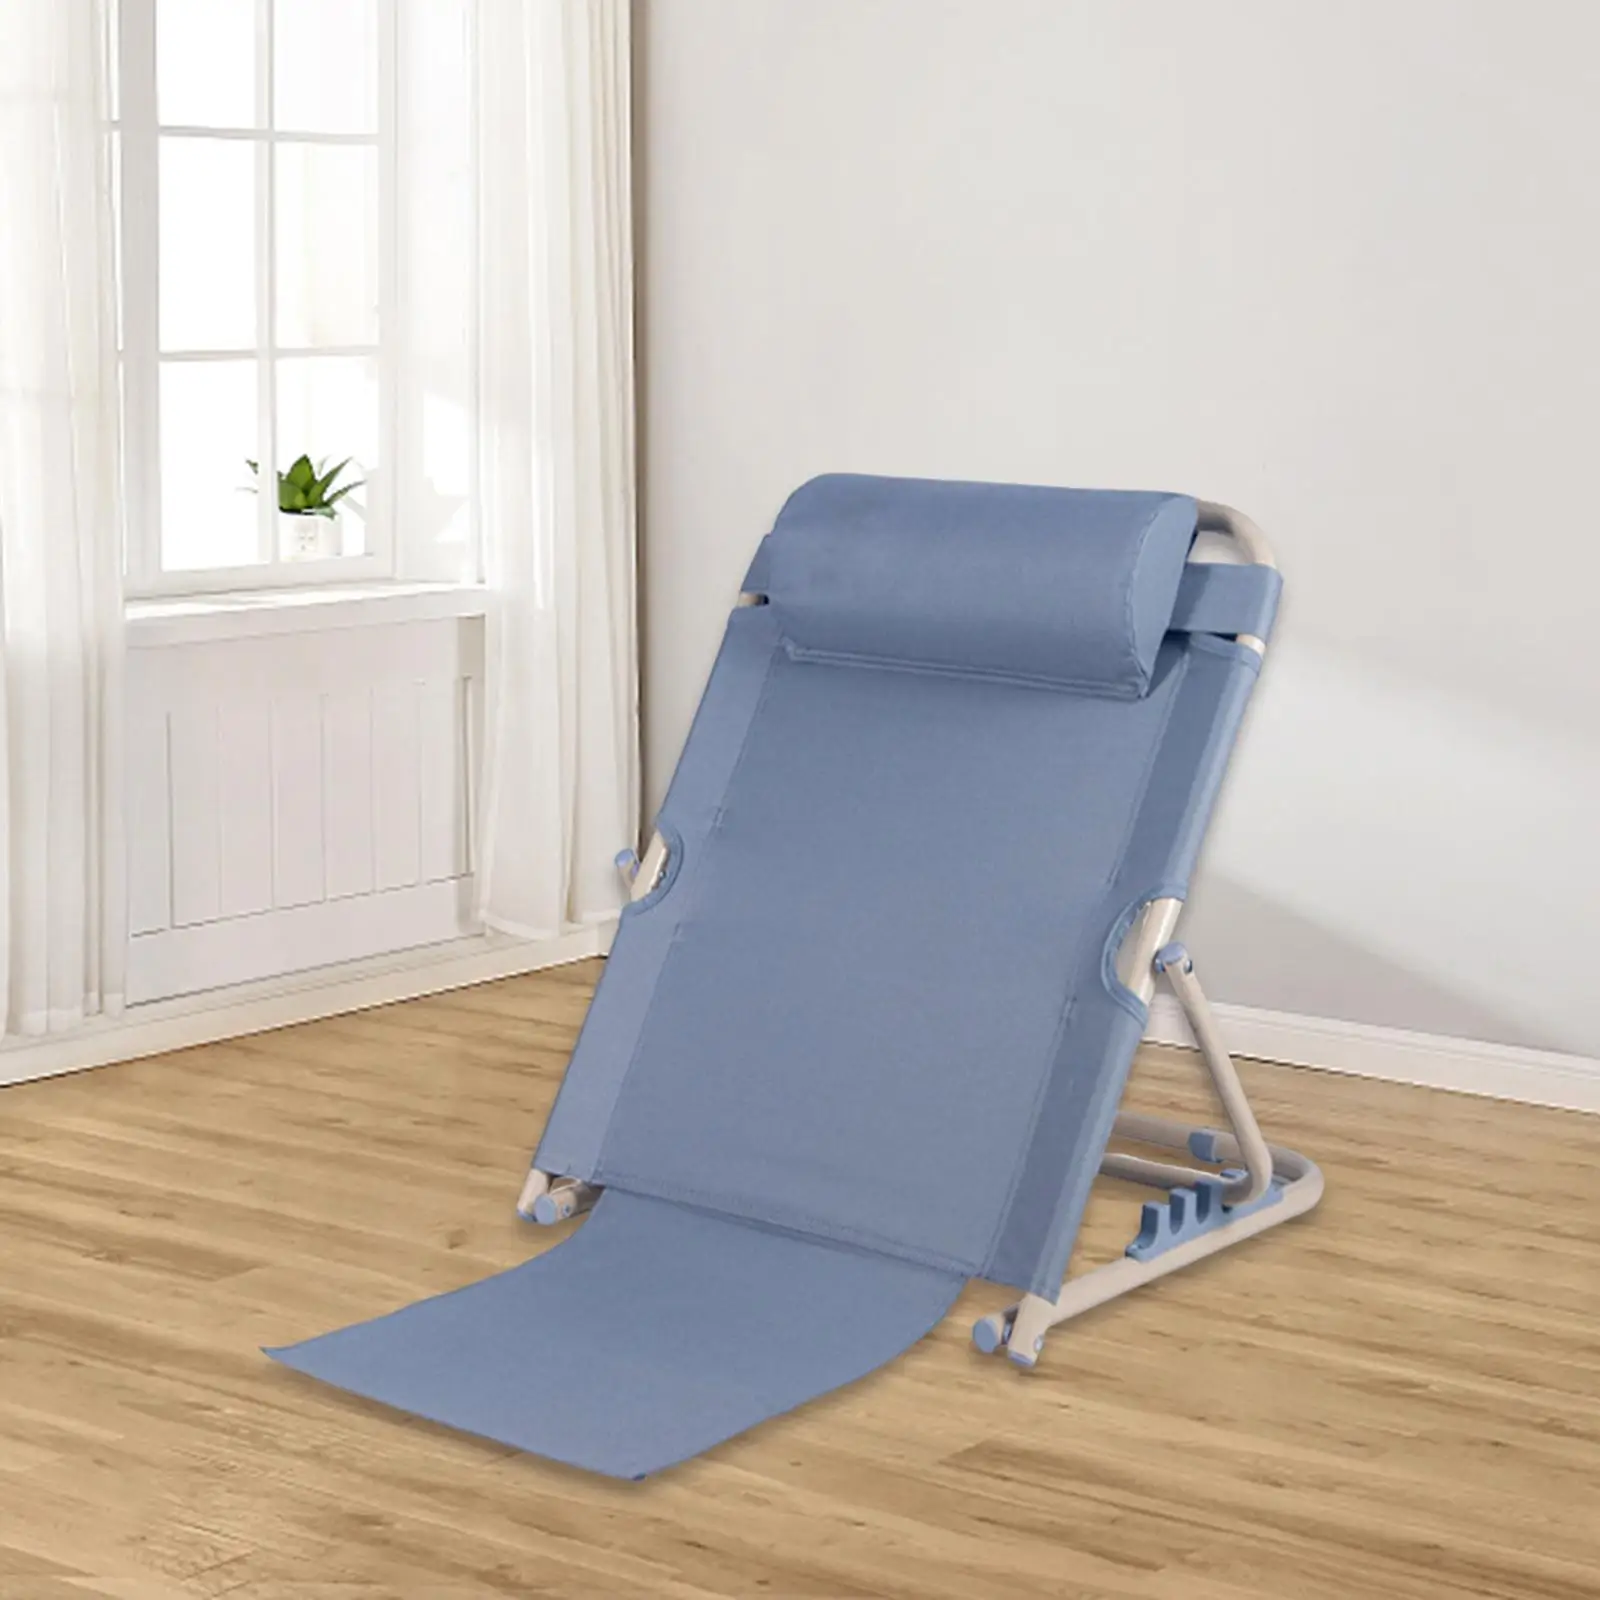 Sit up Back Rest Folding Chair Adjustable with Head Cushion Multi Function Portable Support Bed Backrest for Head Neck